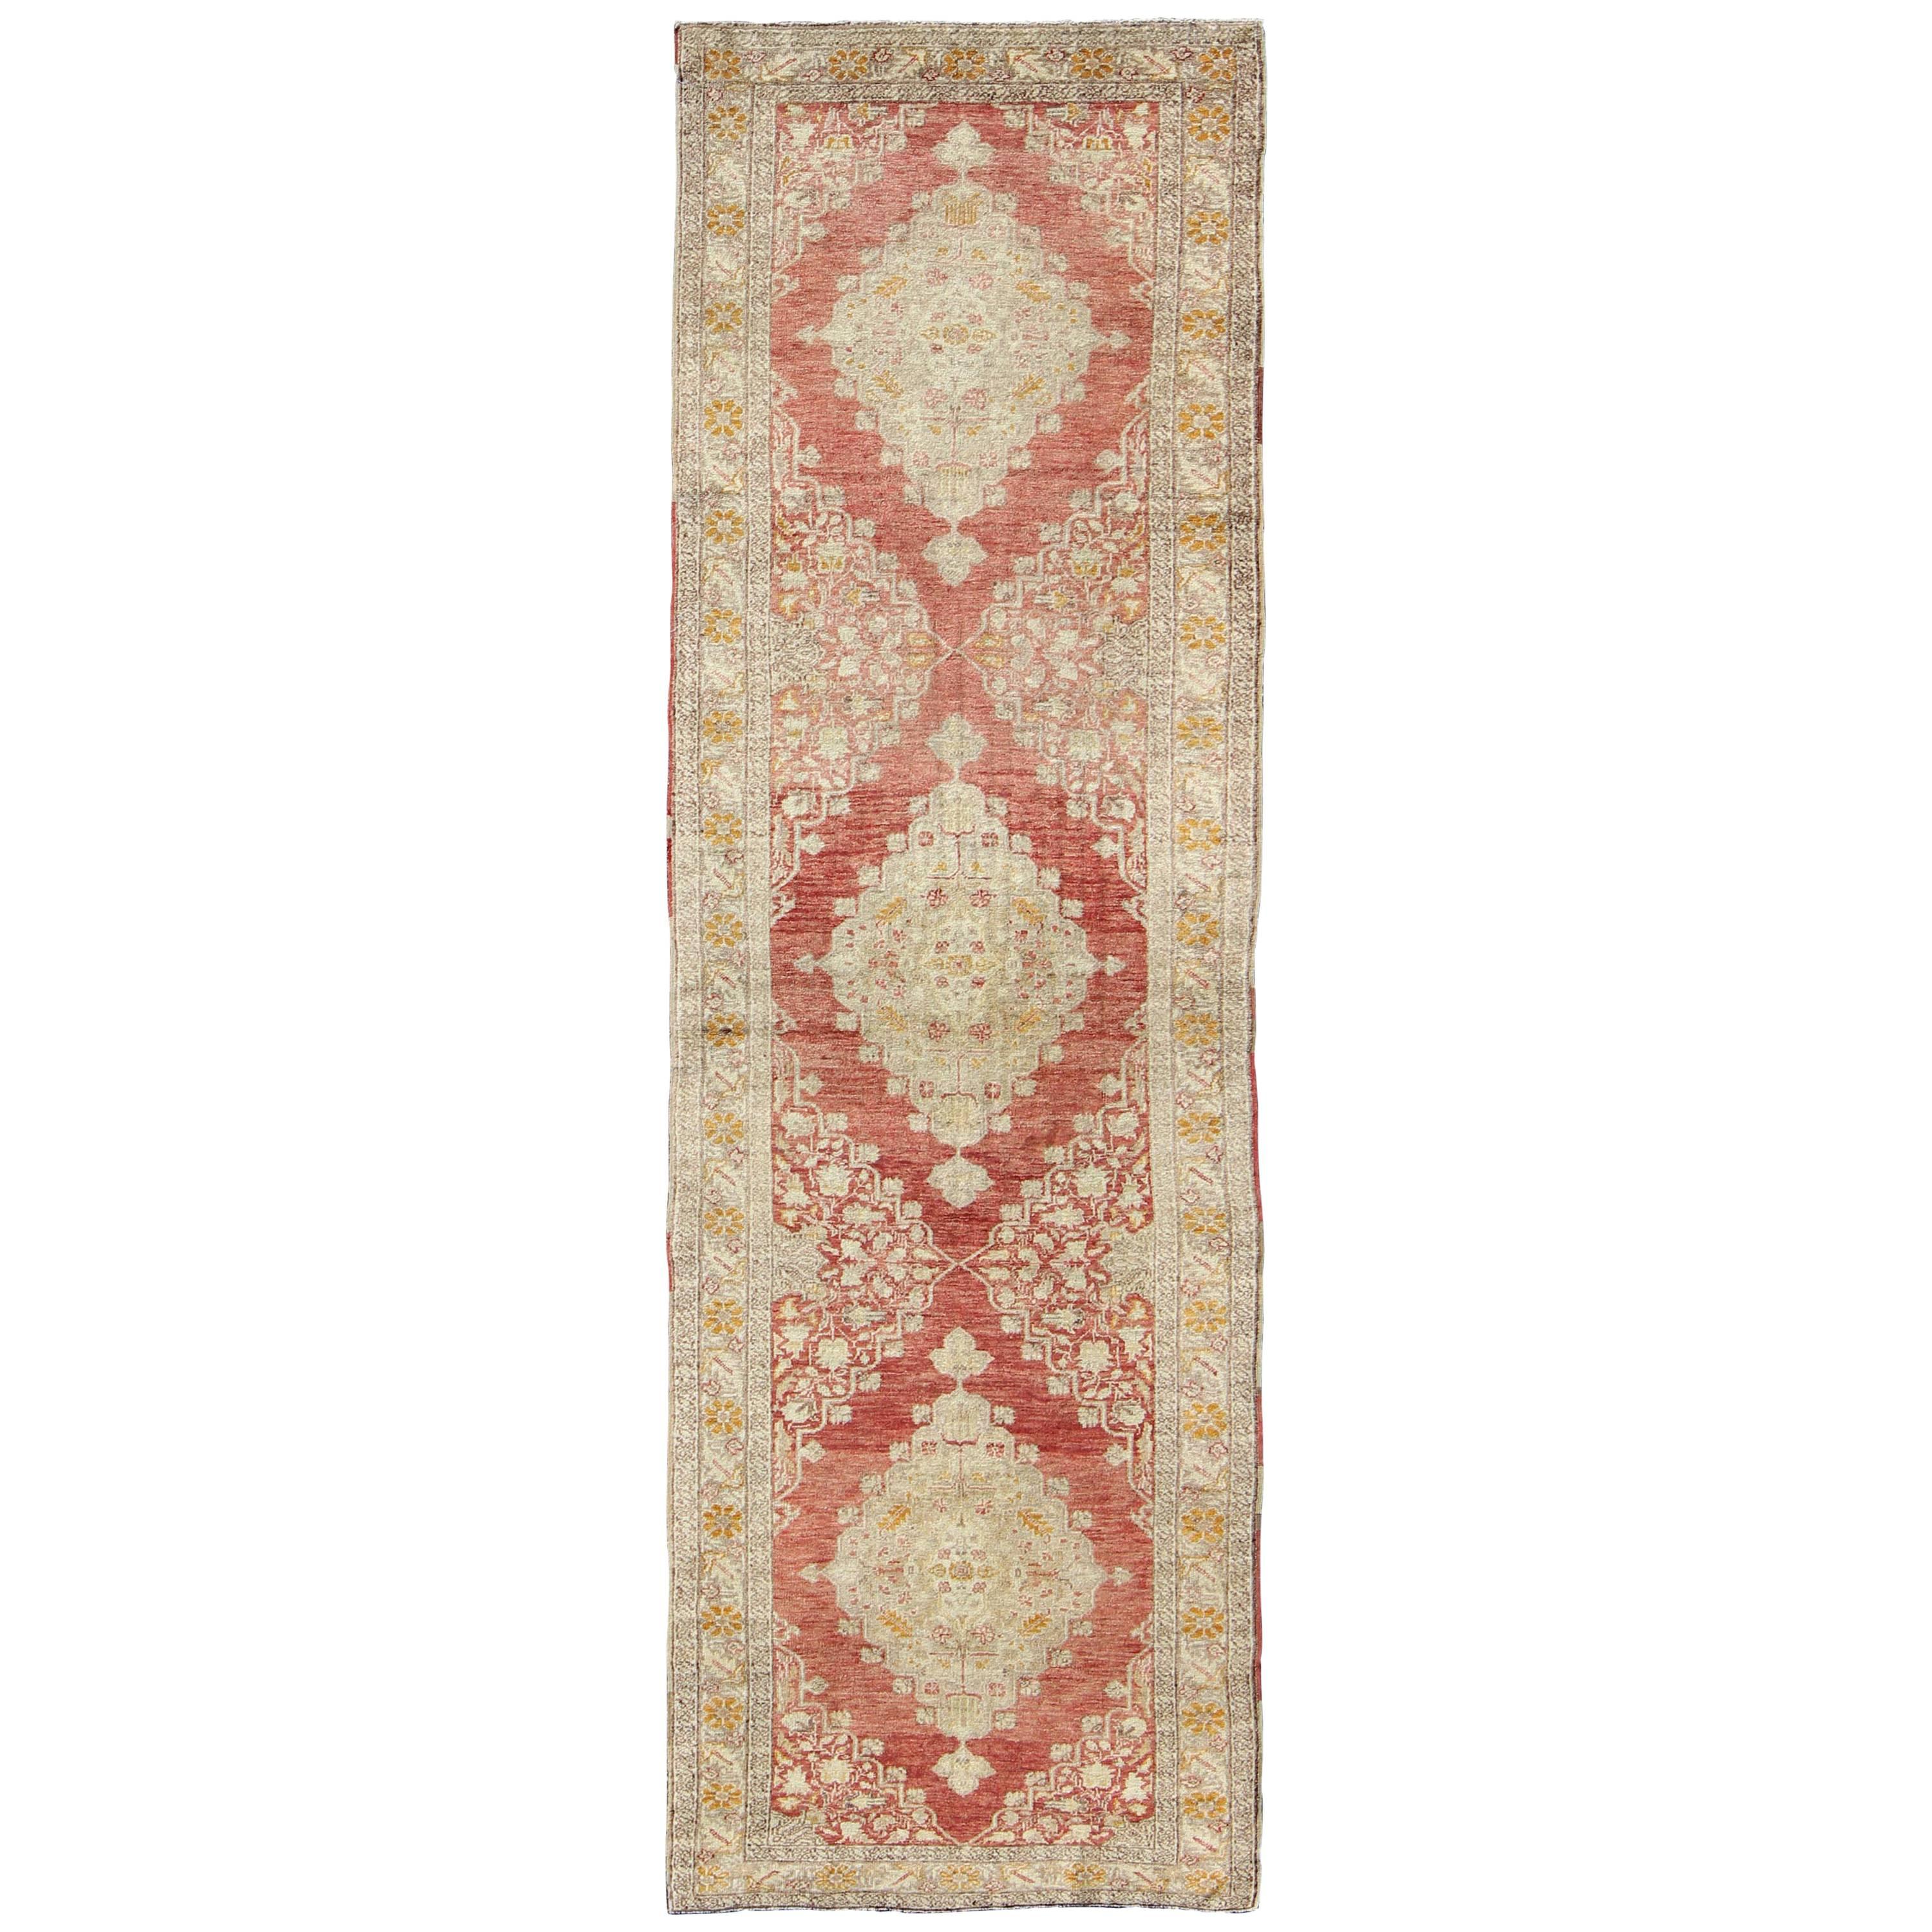 Antique Turkish Oushak Runner with Red Background and Ivory/Cream Medallions